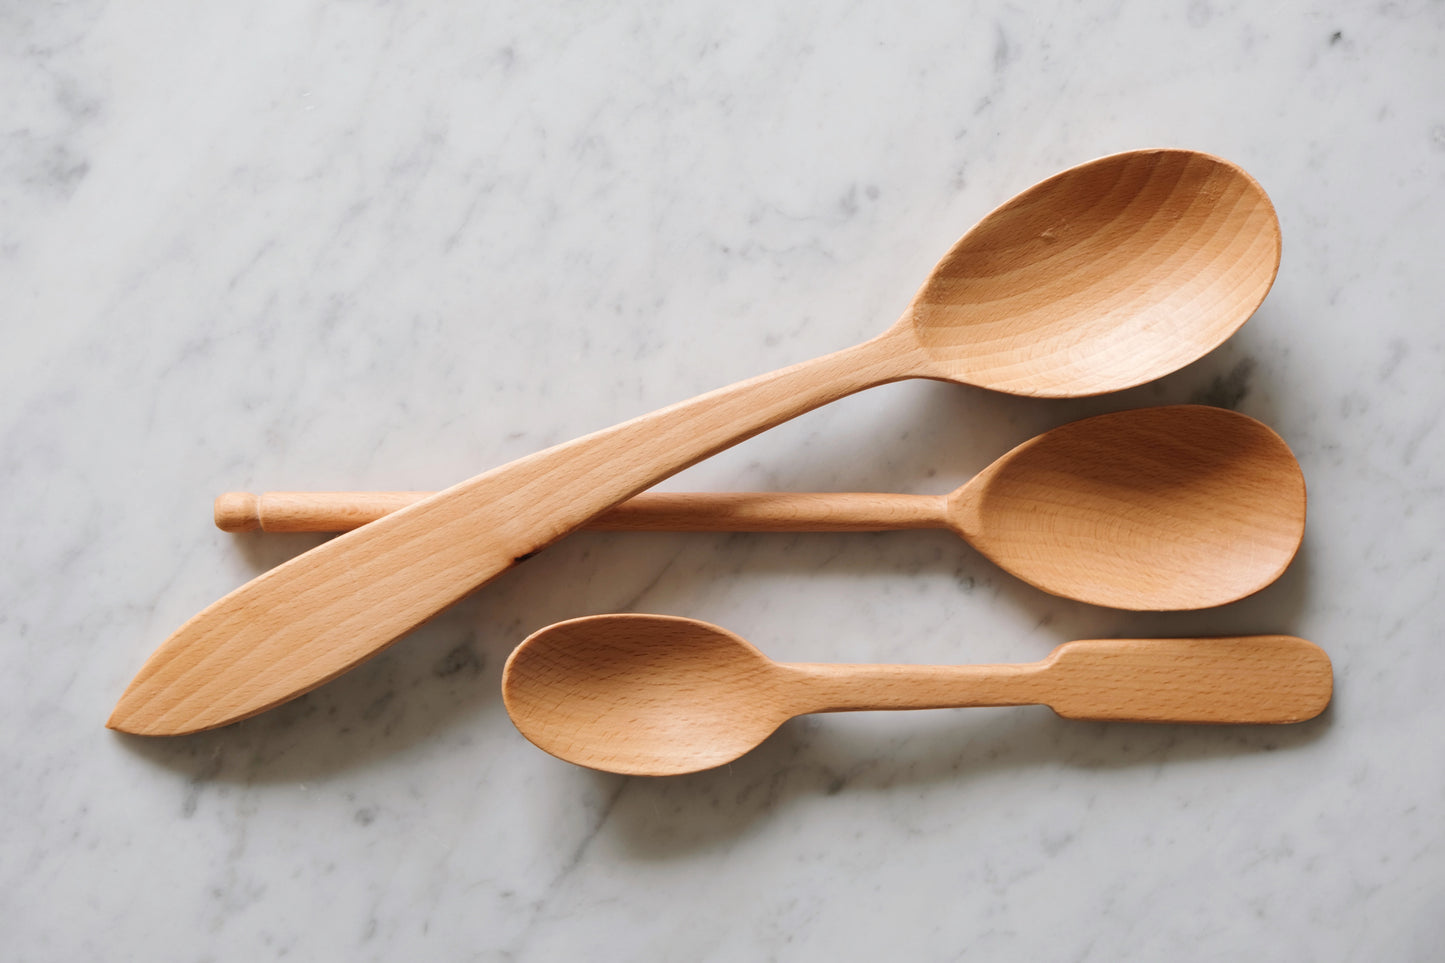 Large Wooden Cooking Spoon Sets